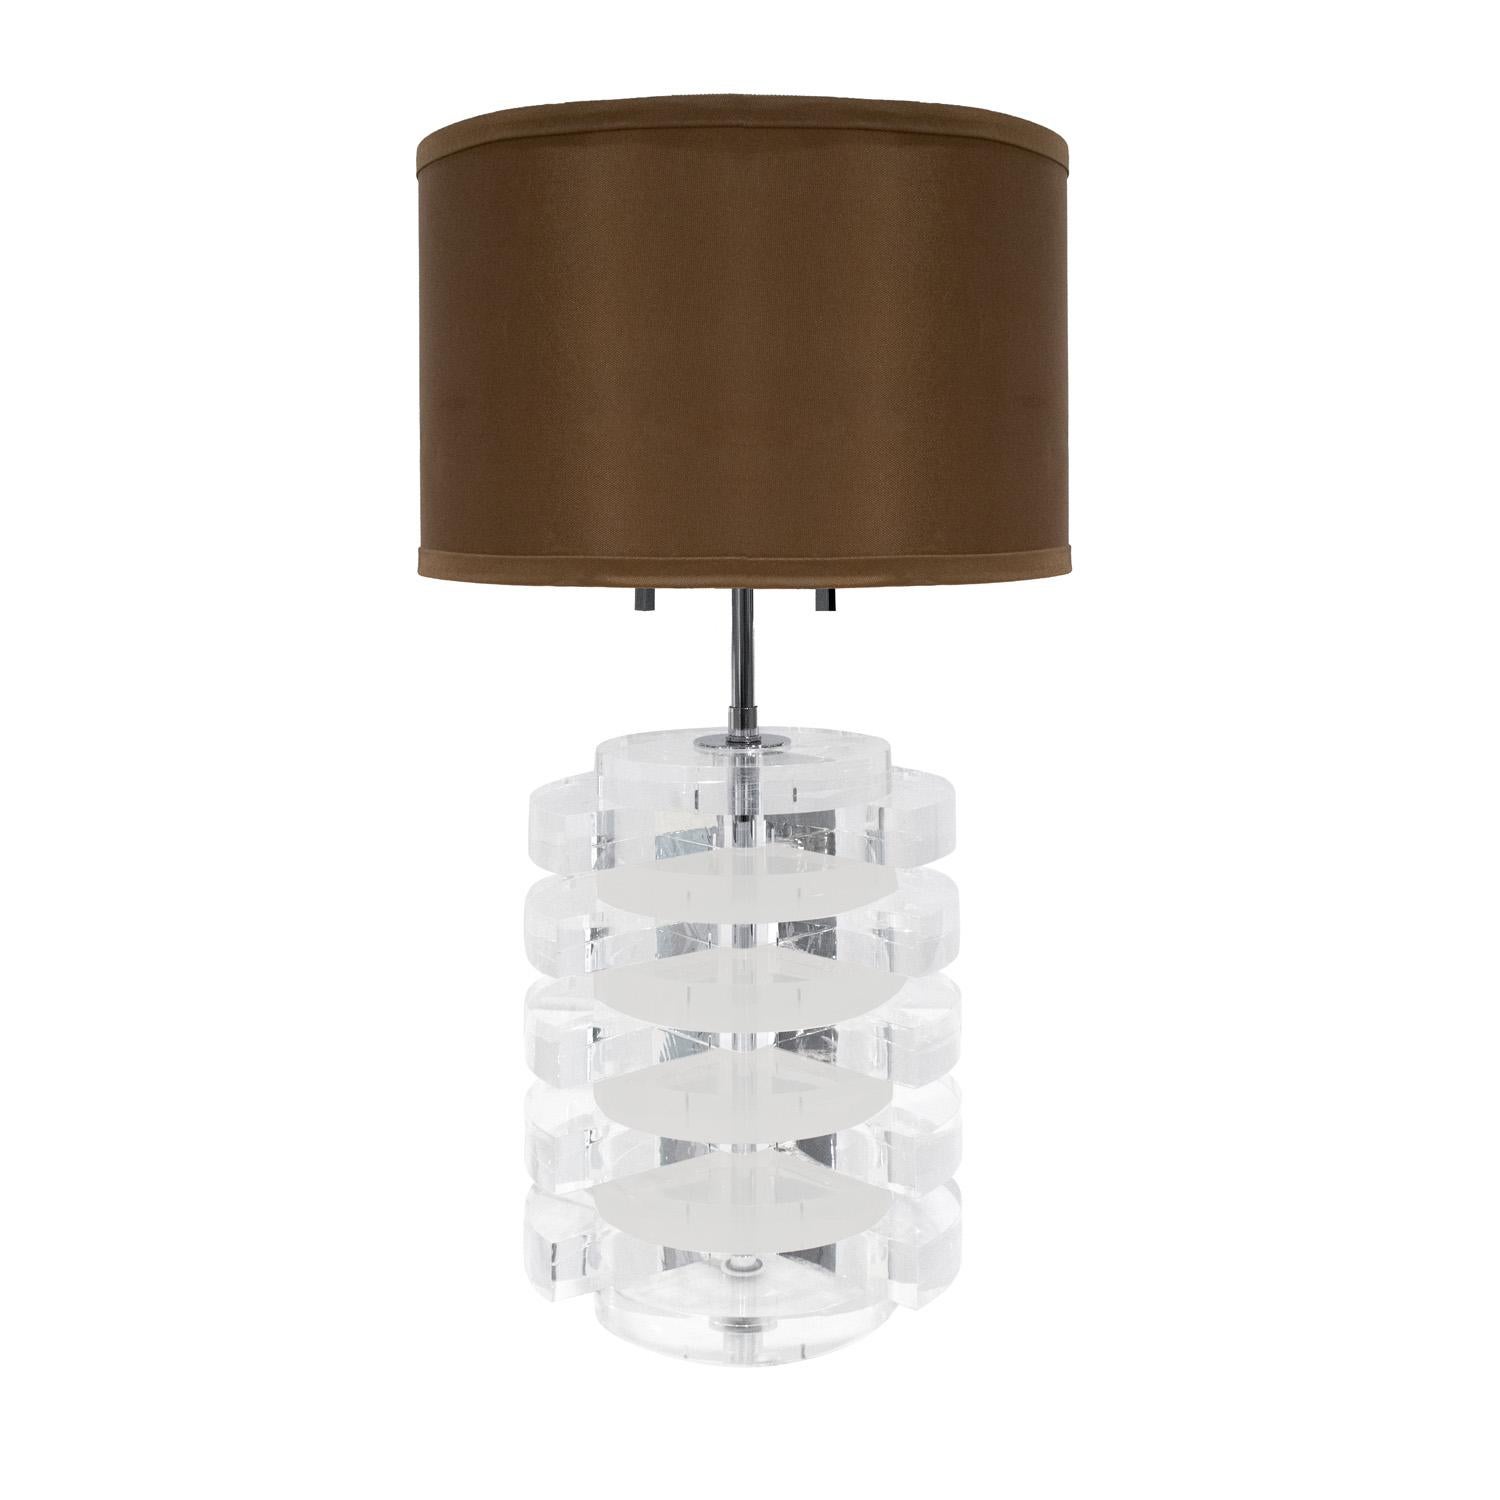 Table lamp with solid lucite discs and polished chrome hardware by Karl Springer, American 1970's. The stacked lucite disks are very chic.  Newly rewired with new sockets and cord.

Dimensions:
Diam: 9 inches
H: 26 inches (adjusts to 29